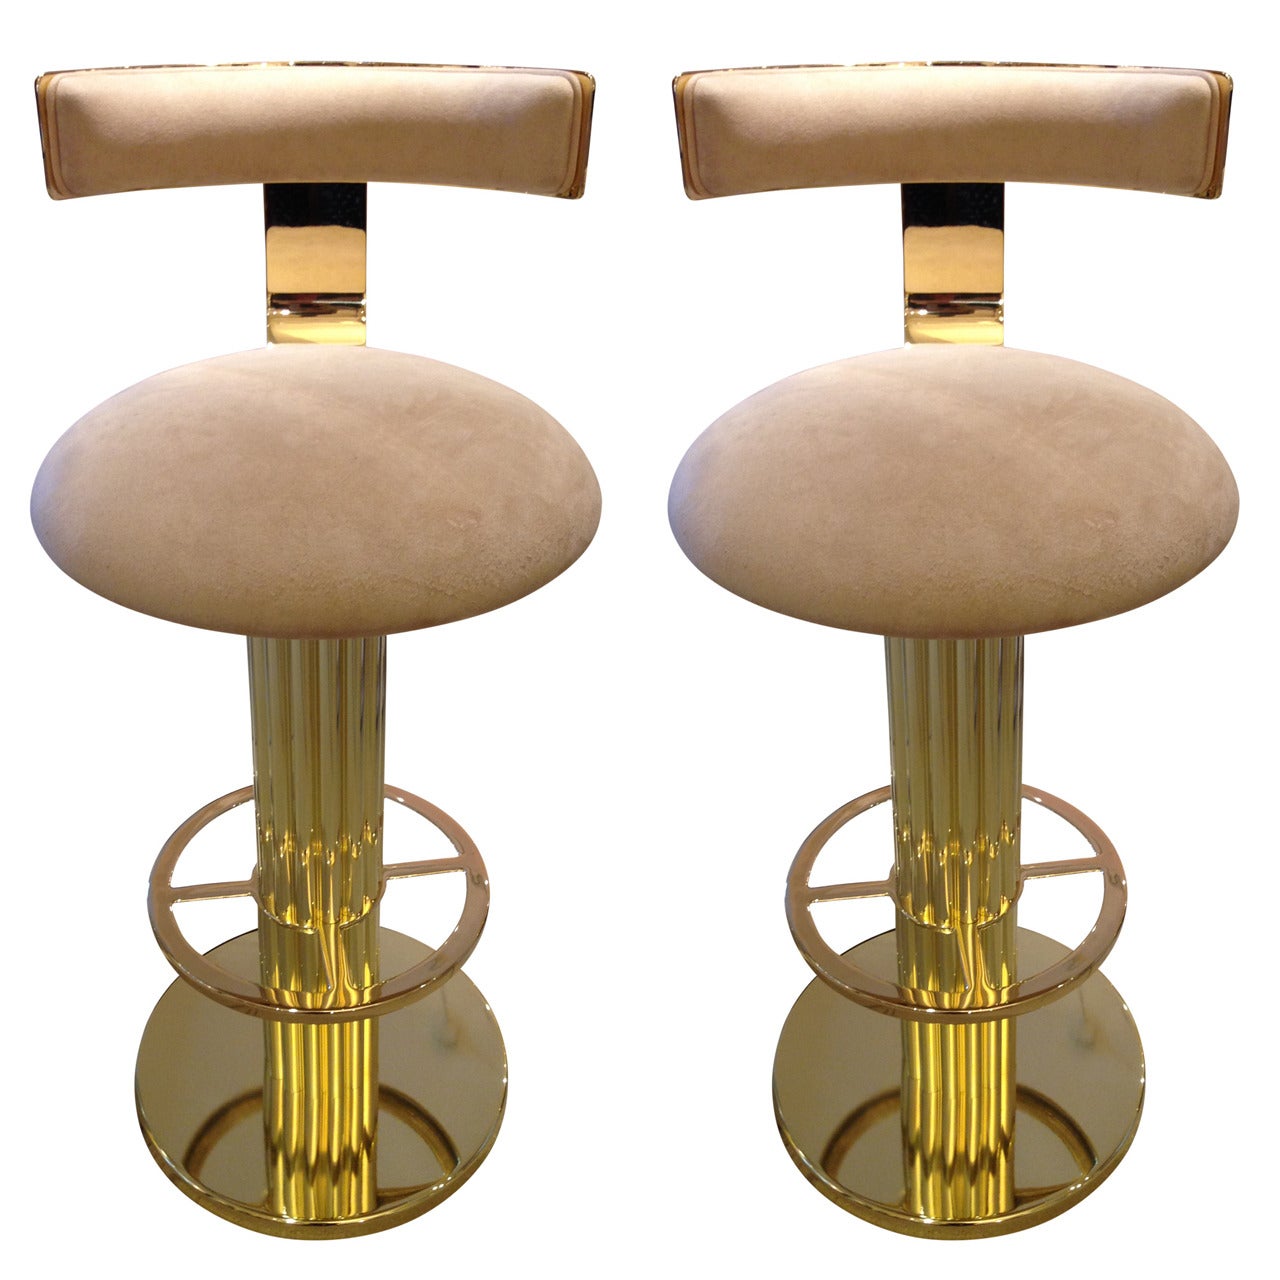 Pair of Reeded Column Bar Stools by Designs for Leisure